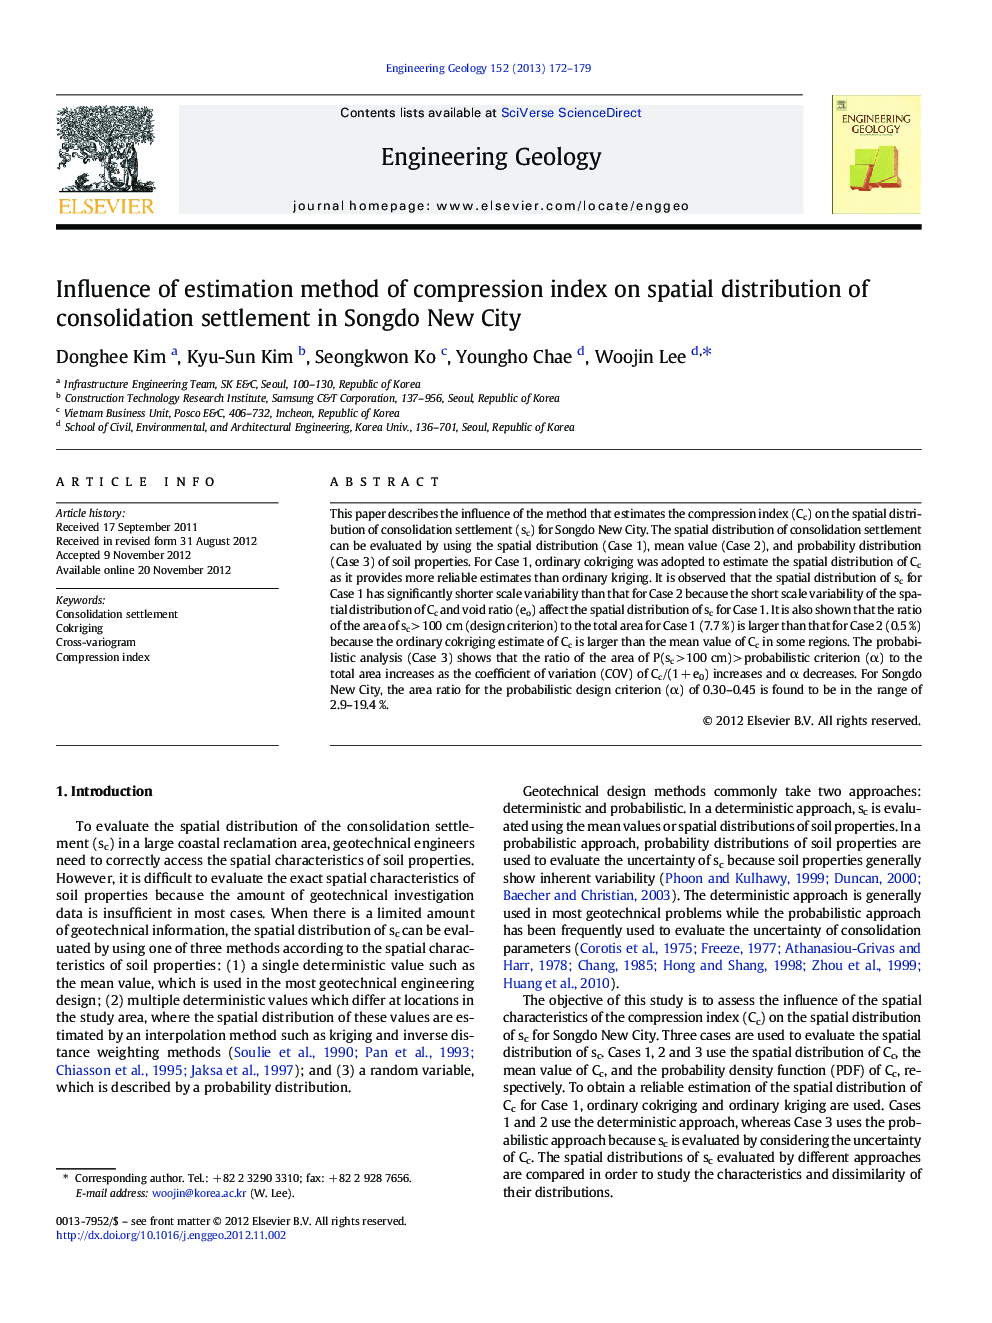 Influence of estimation method of compression index on spatial distribution of consolidation settlement in Songdo New City